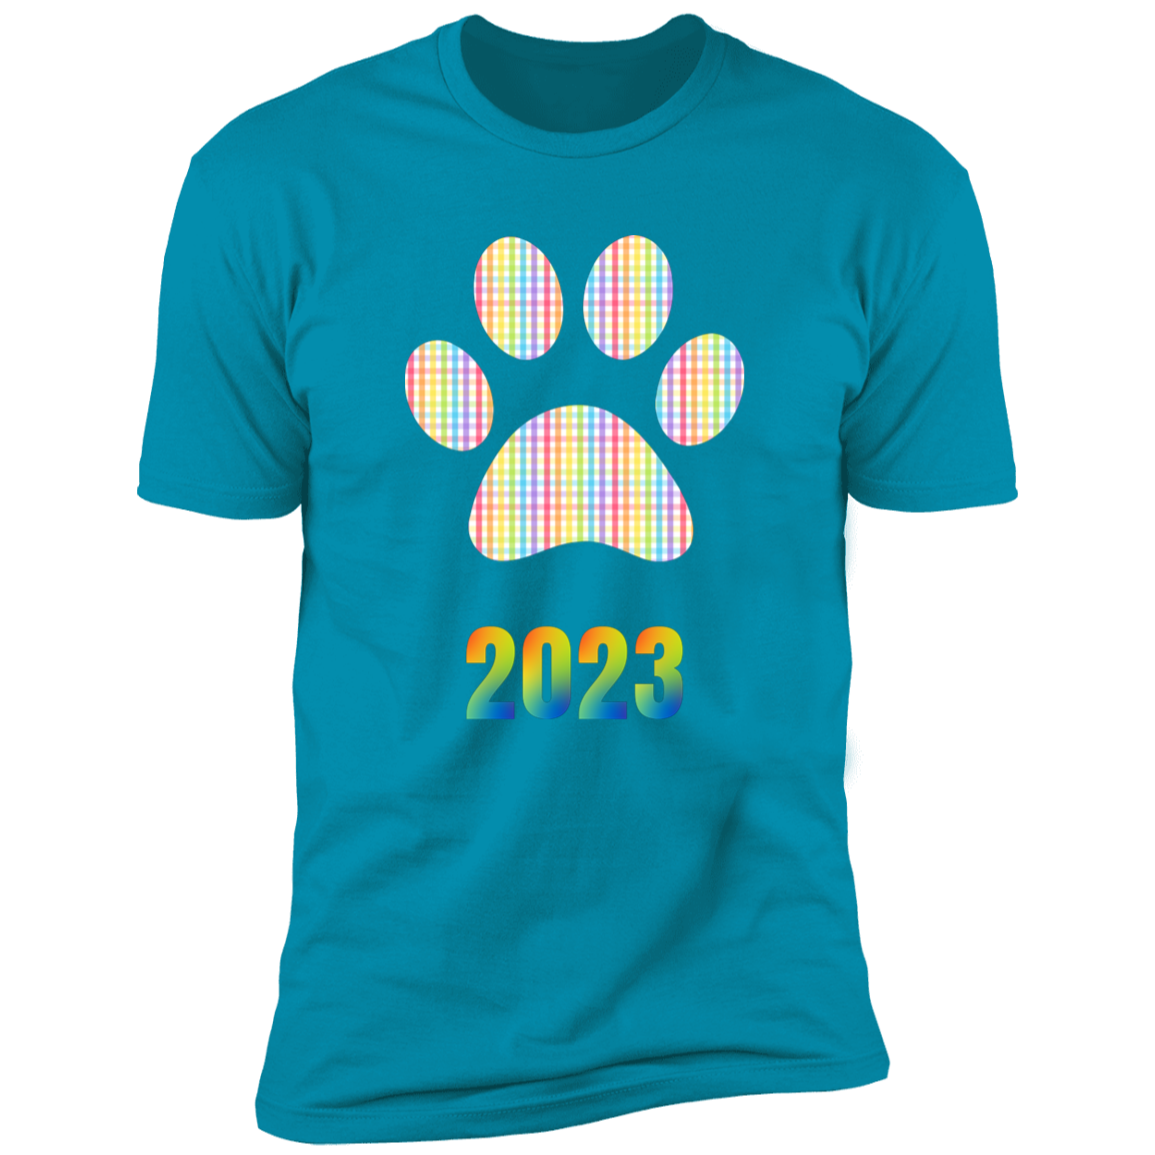 Pride Paw 2023 (Gingham) Pride T-shirt, Paw Pride Dog Shirt for humans, in turquoise